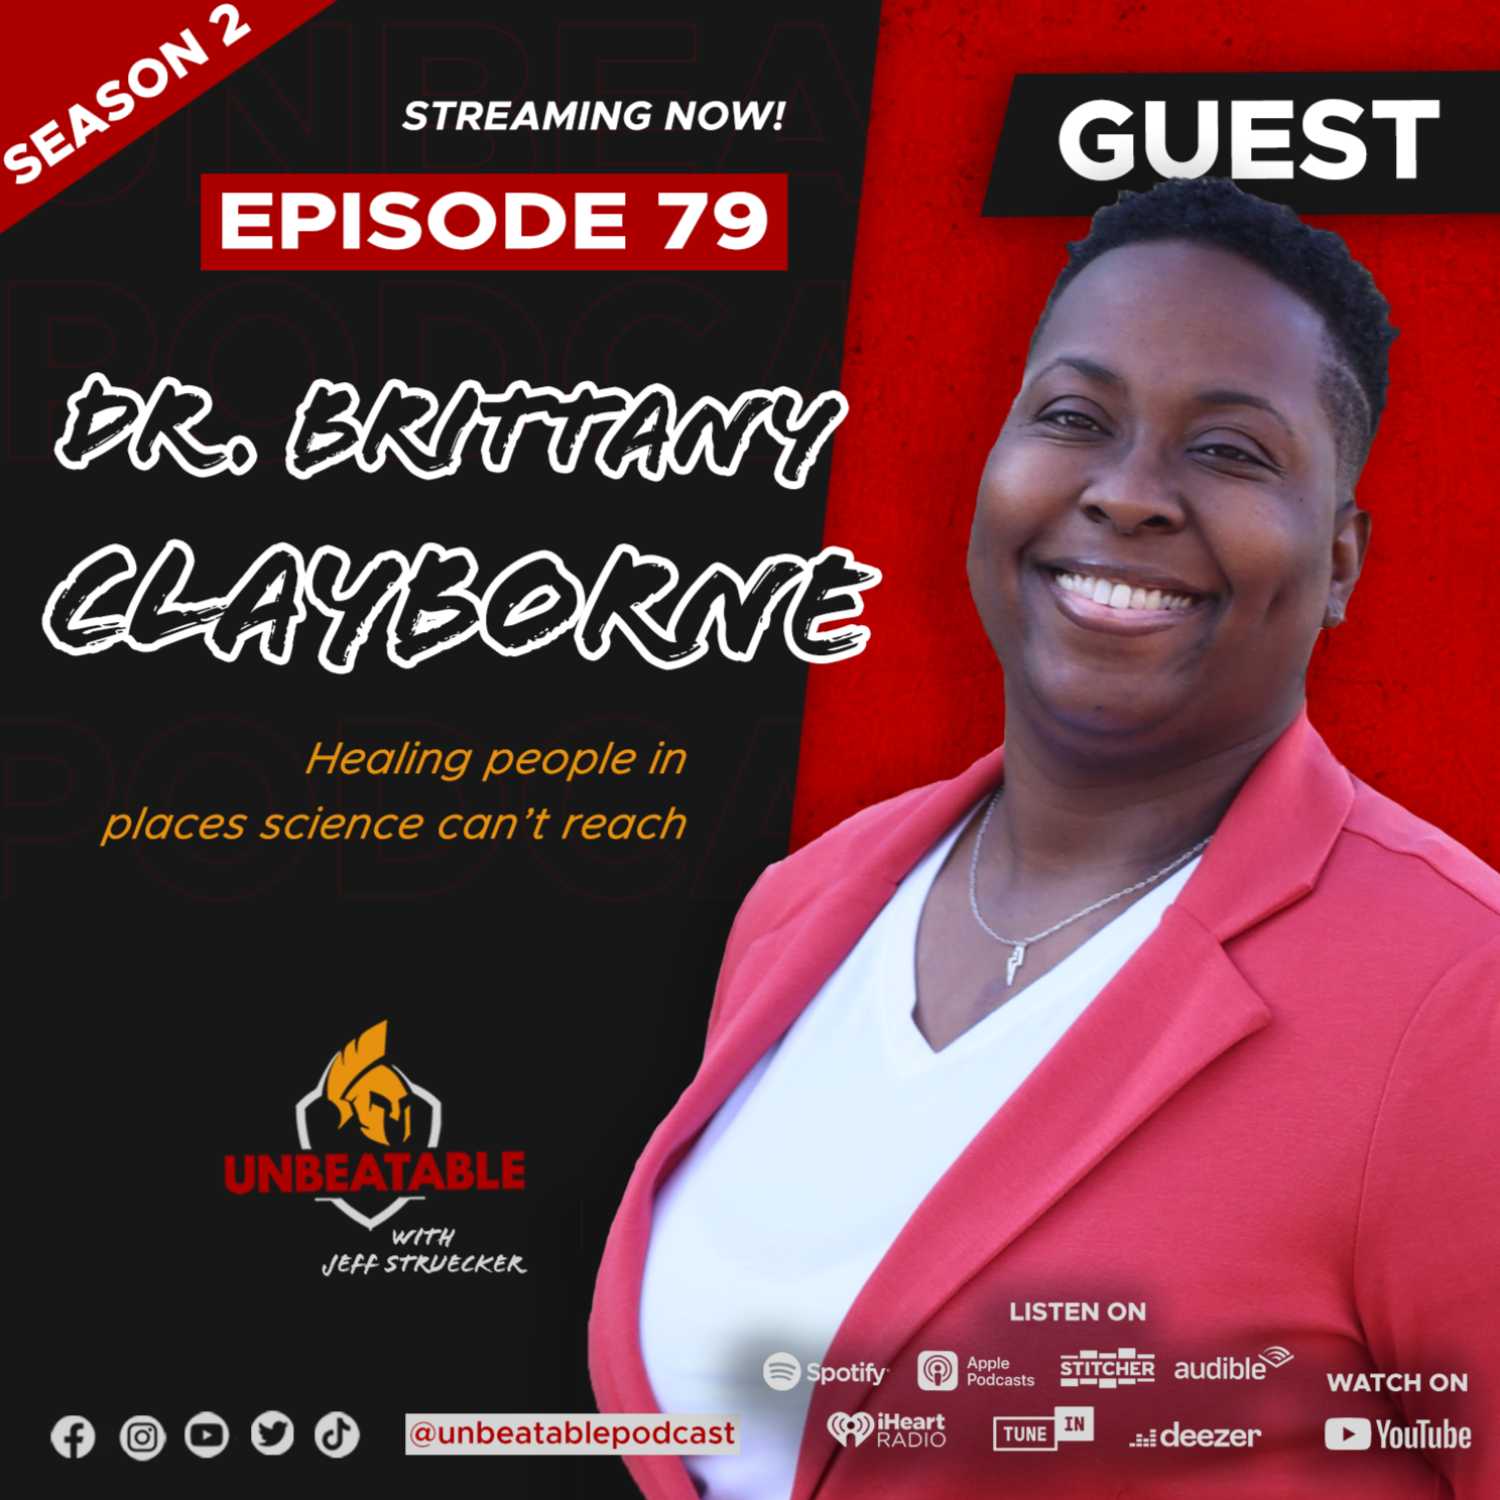 Ep. 79: Dr. Brittany Clayborne: Healing people in places science can’t reach